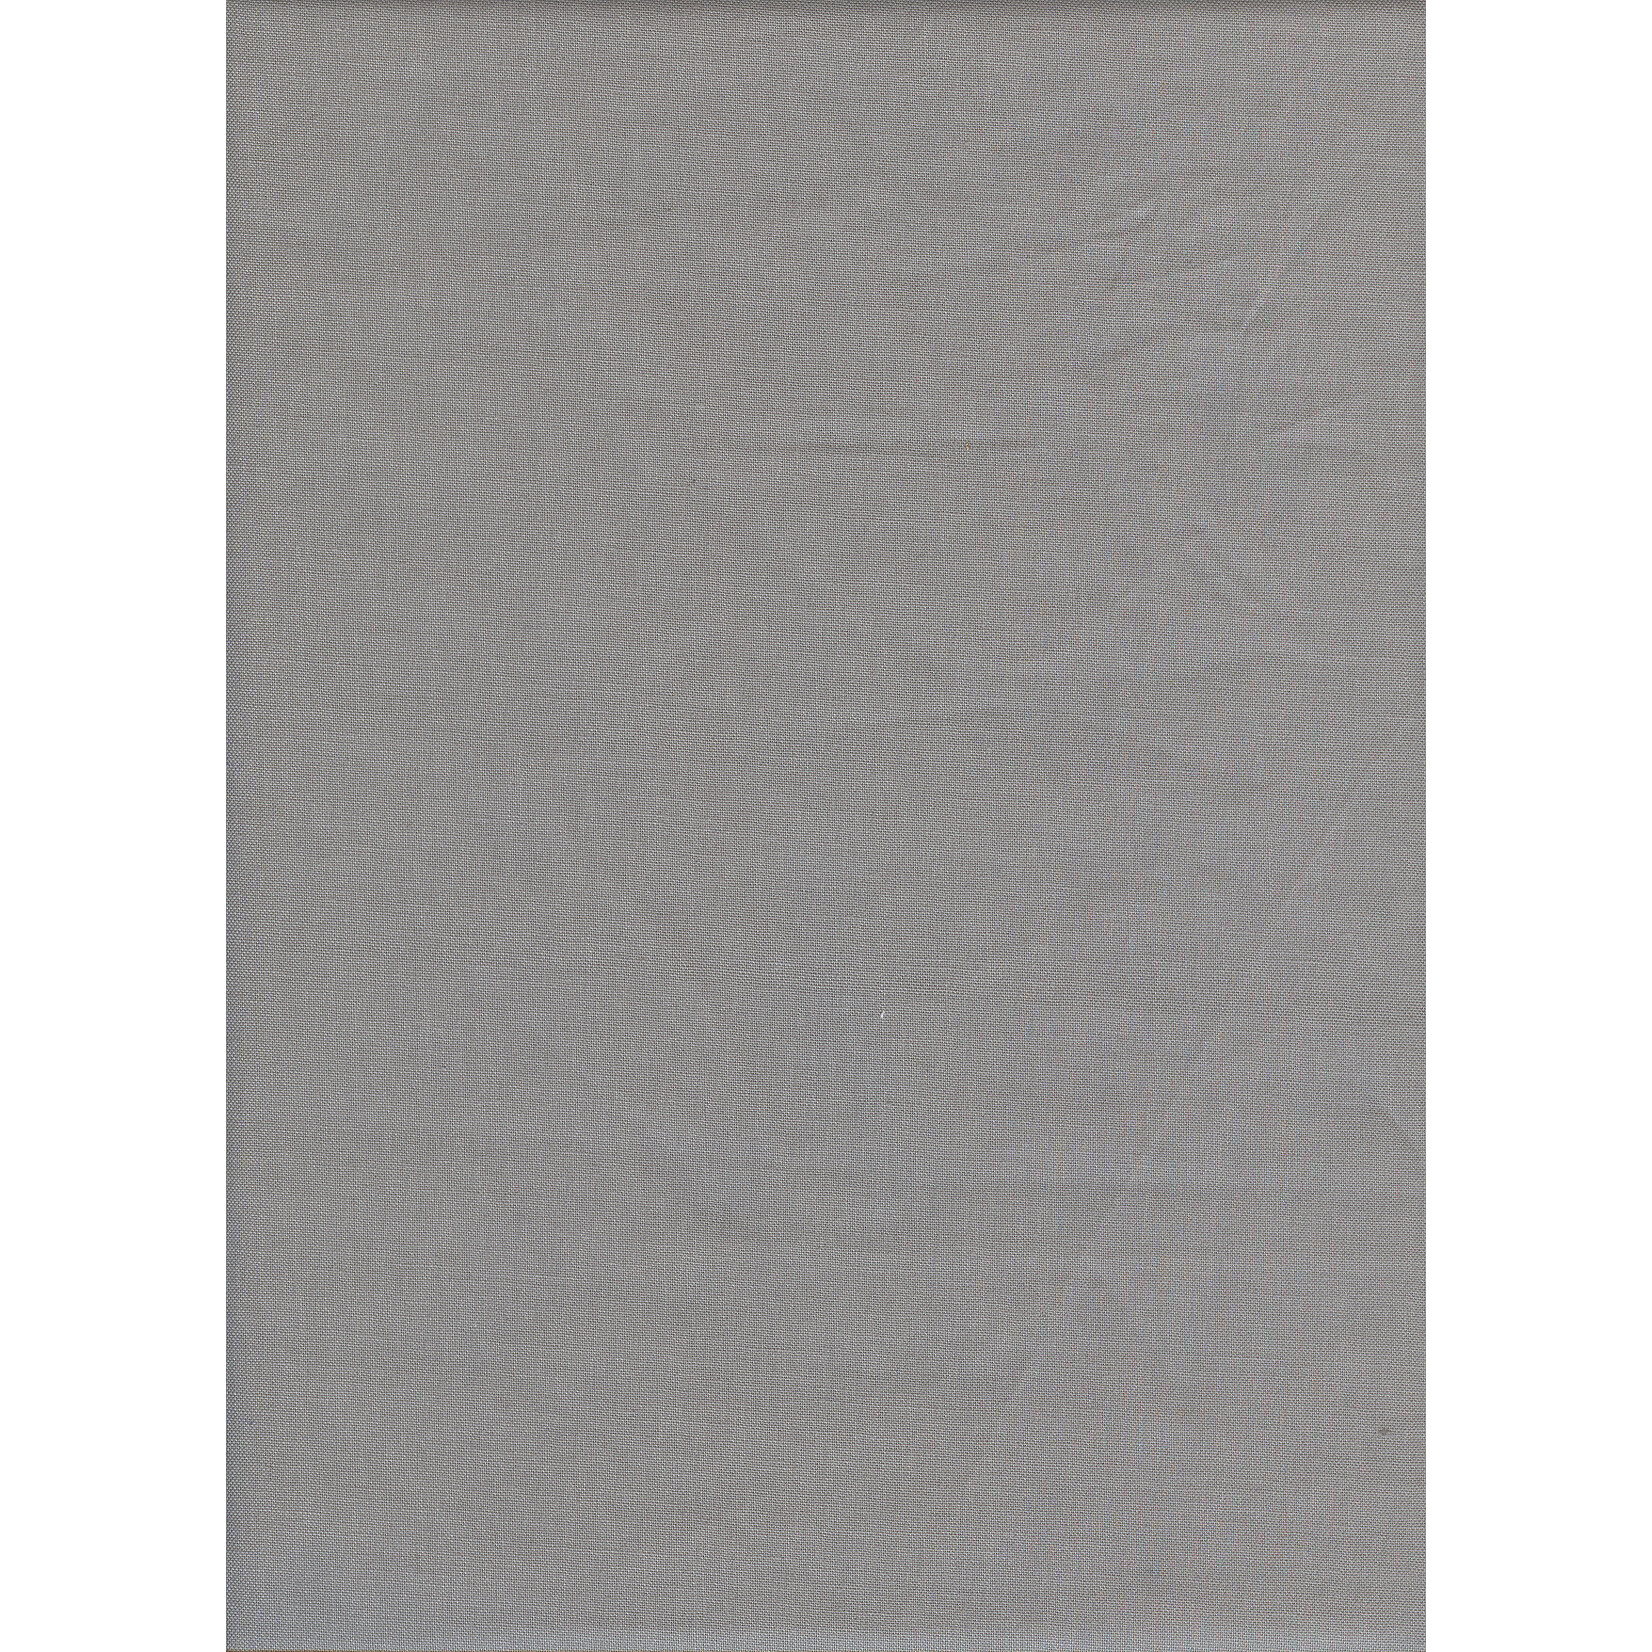 Promaster PRO 10ft x 12ft Grey Solid Background PolyCotton